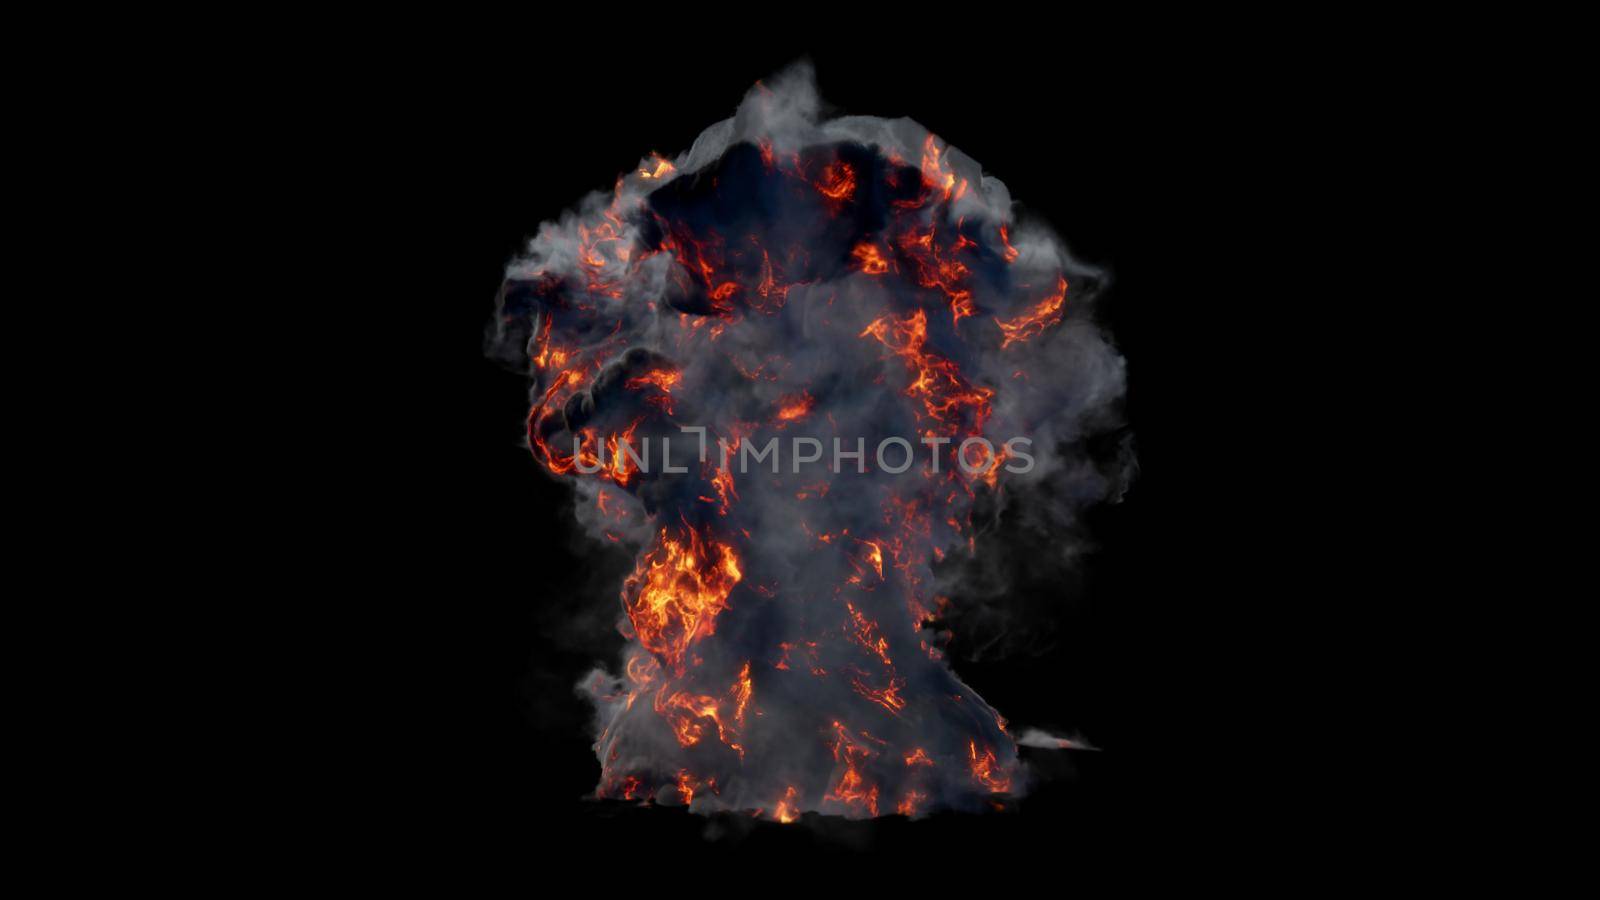 An unusual explosion, fire swirling along with black smoke.